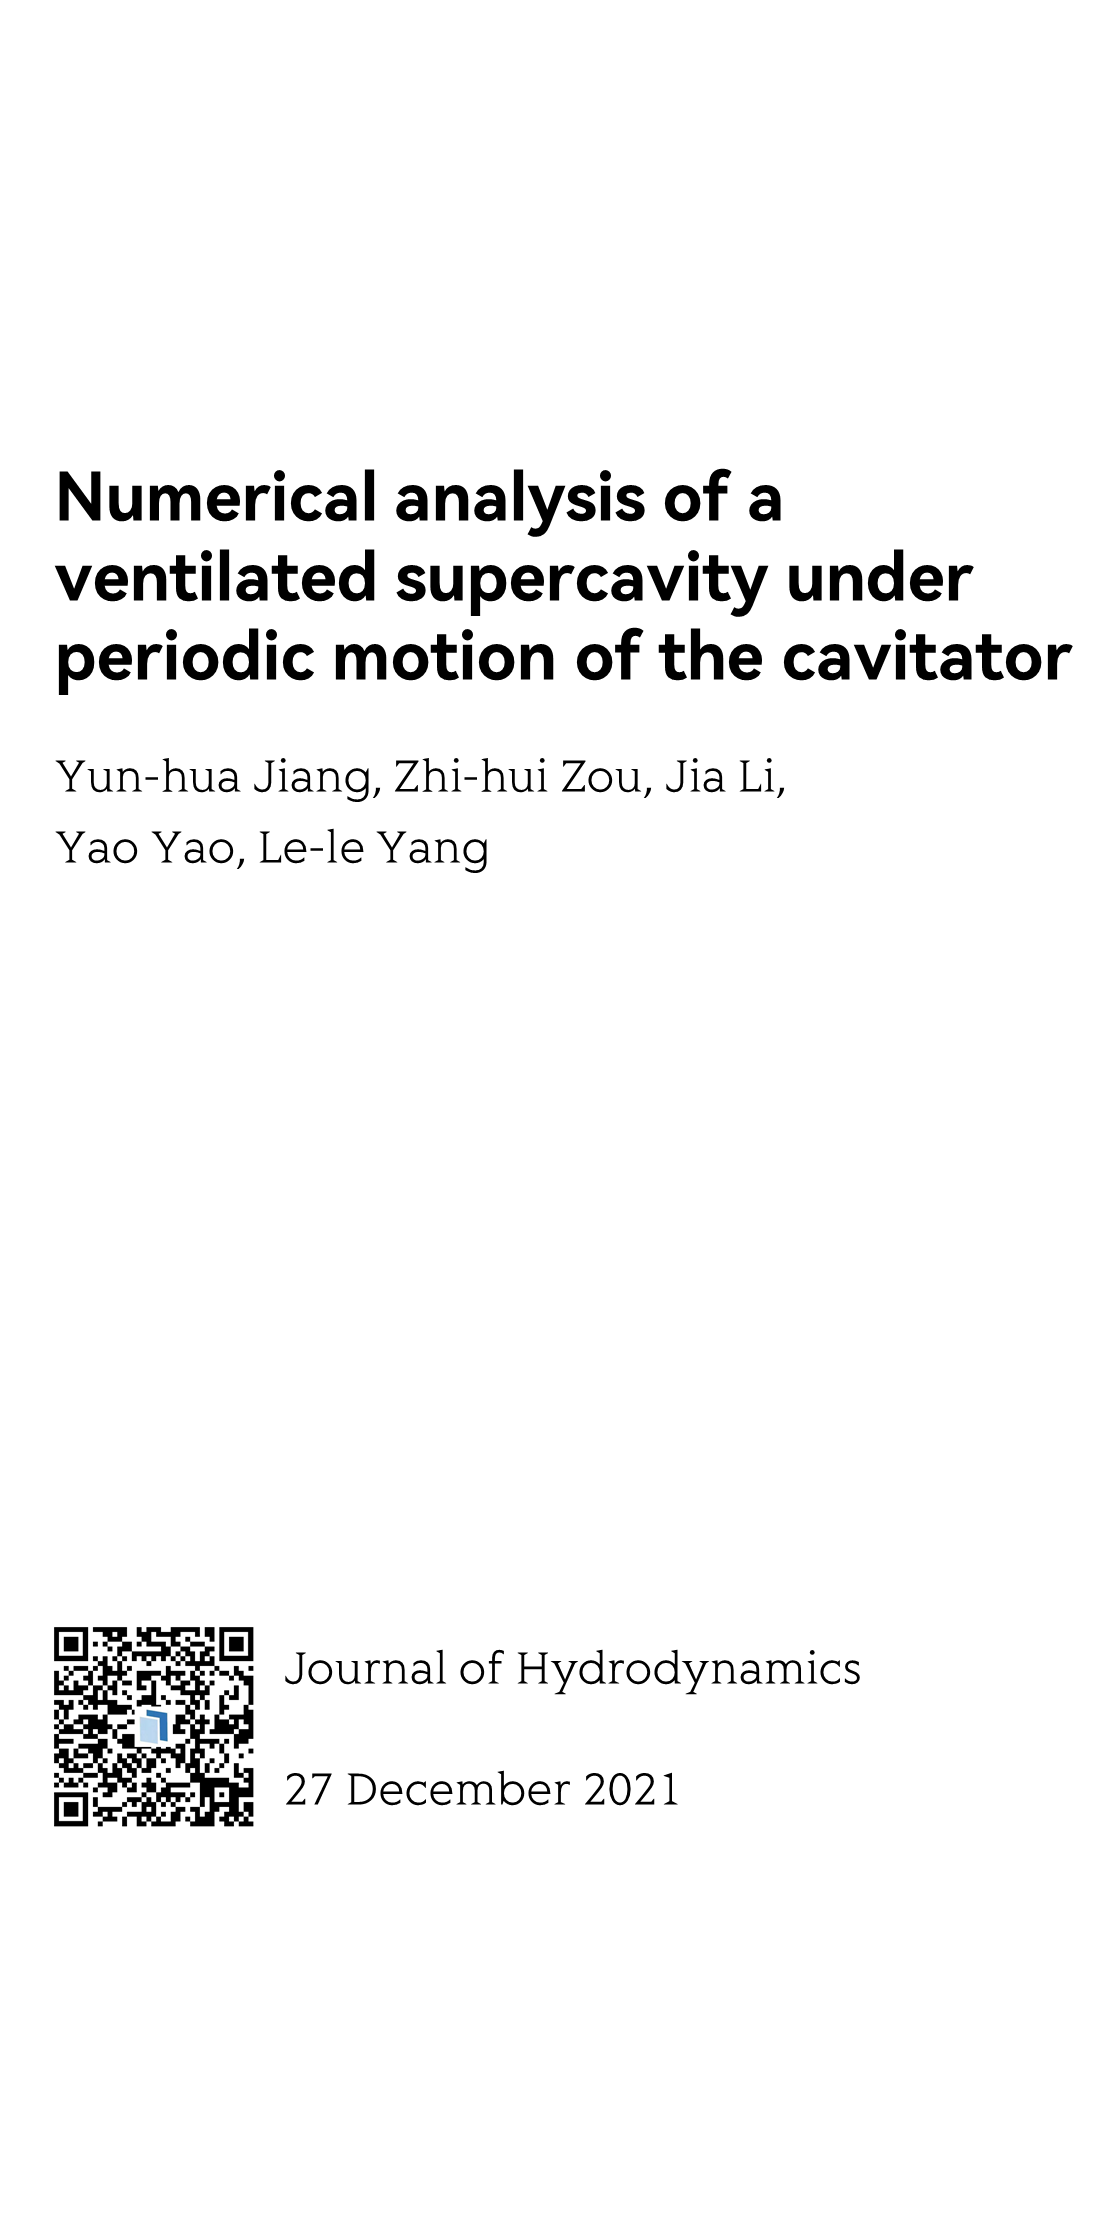 Numerical analysis of a ventilated supercavity under periodic motion of the cavitator_1